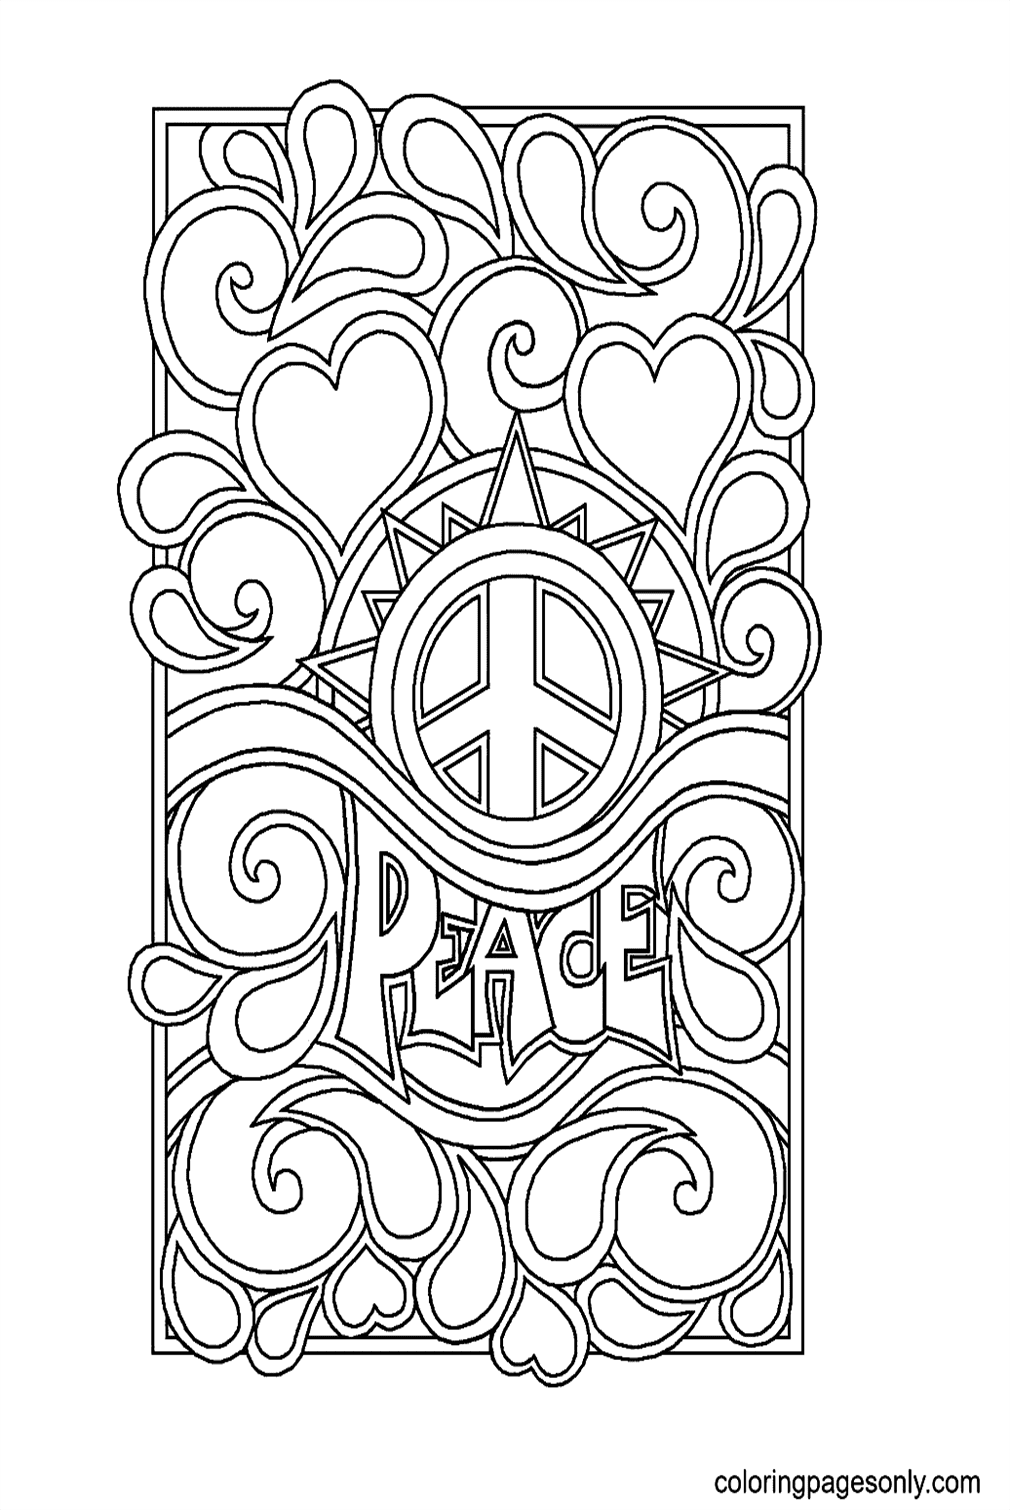 Peace Sign Free Printable Coloring Page